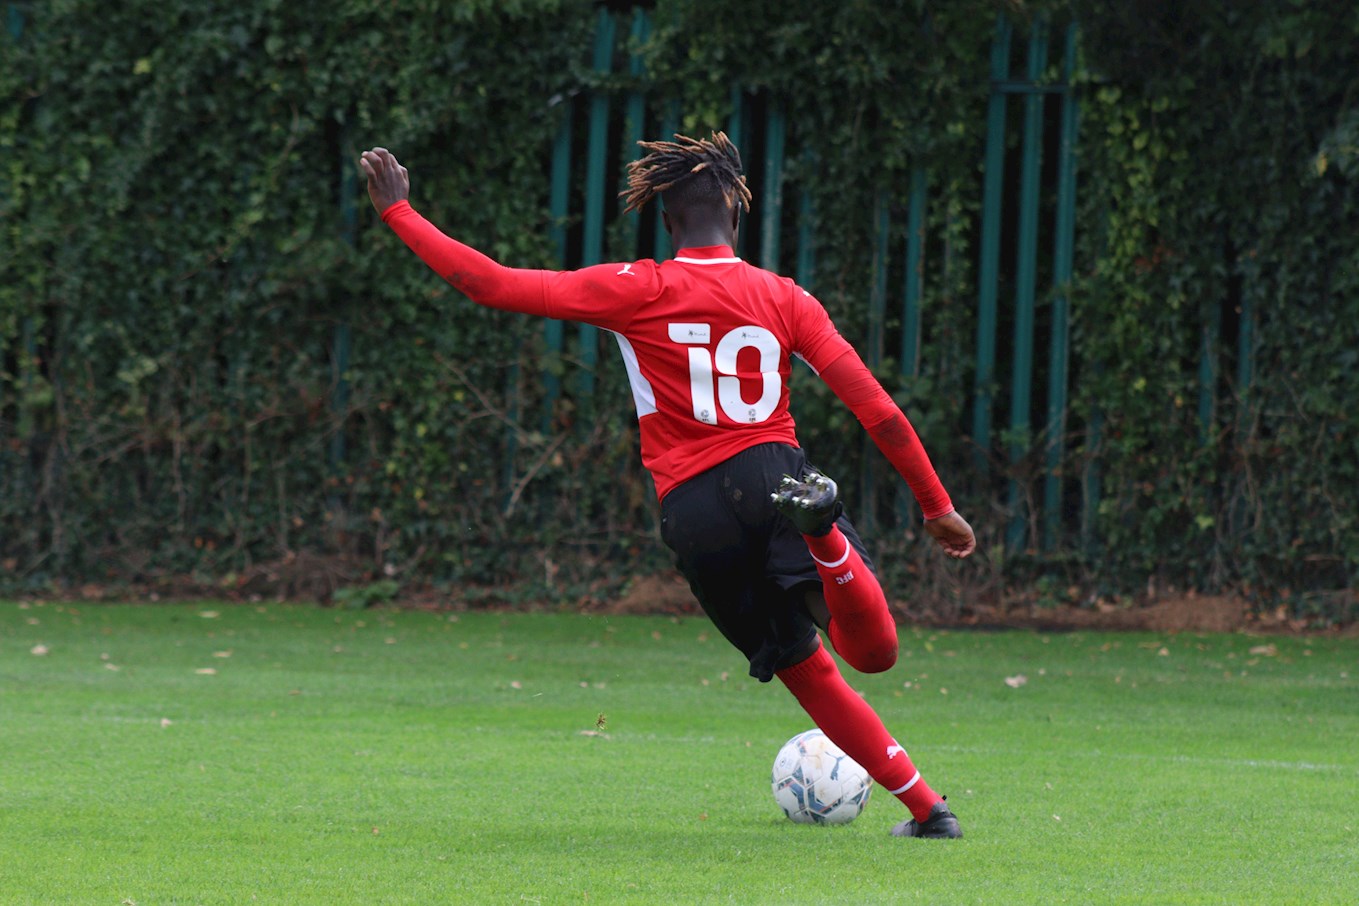 A starlet within the Reds' academy